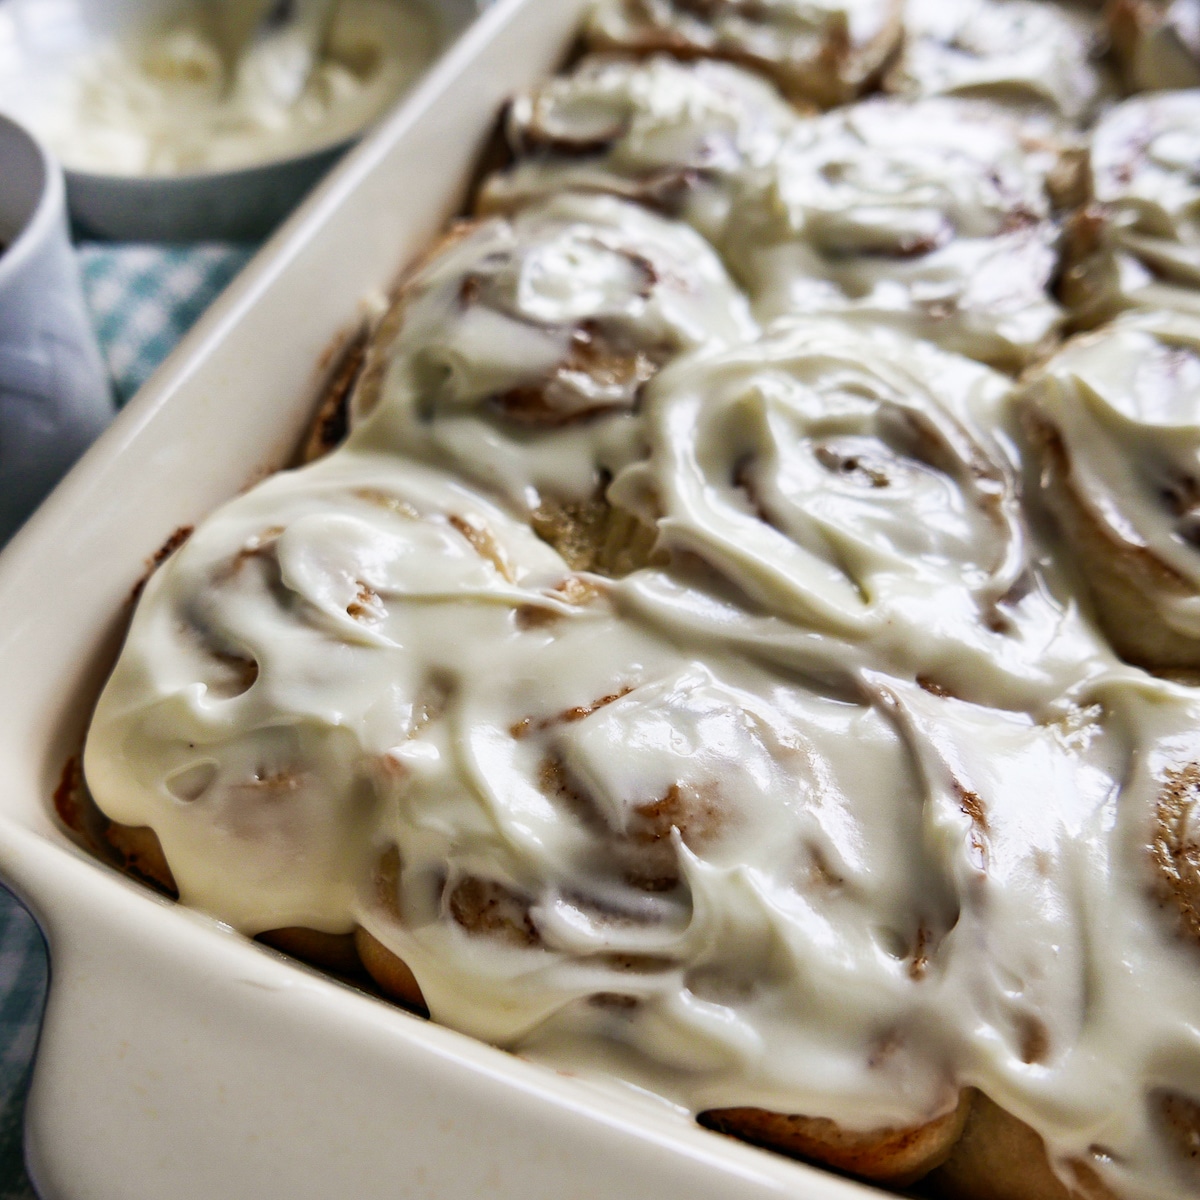 pan of cinnamon rolls with cup of coffee on the side.